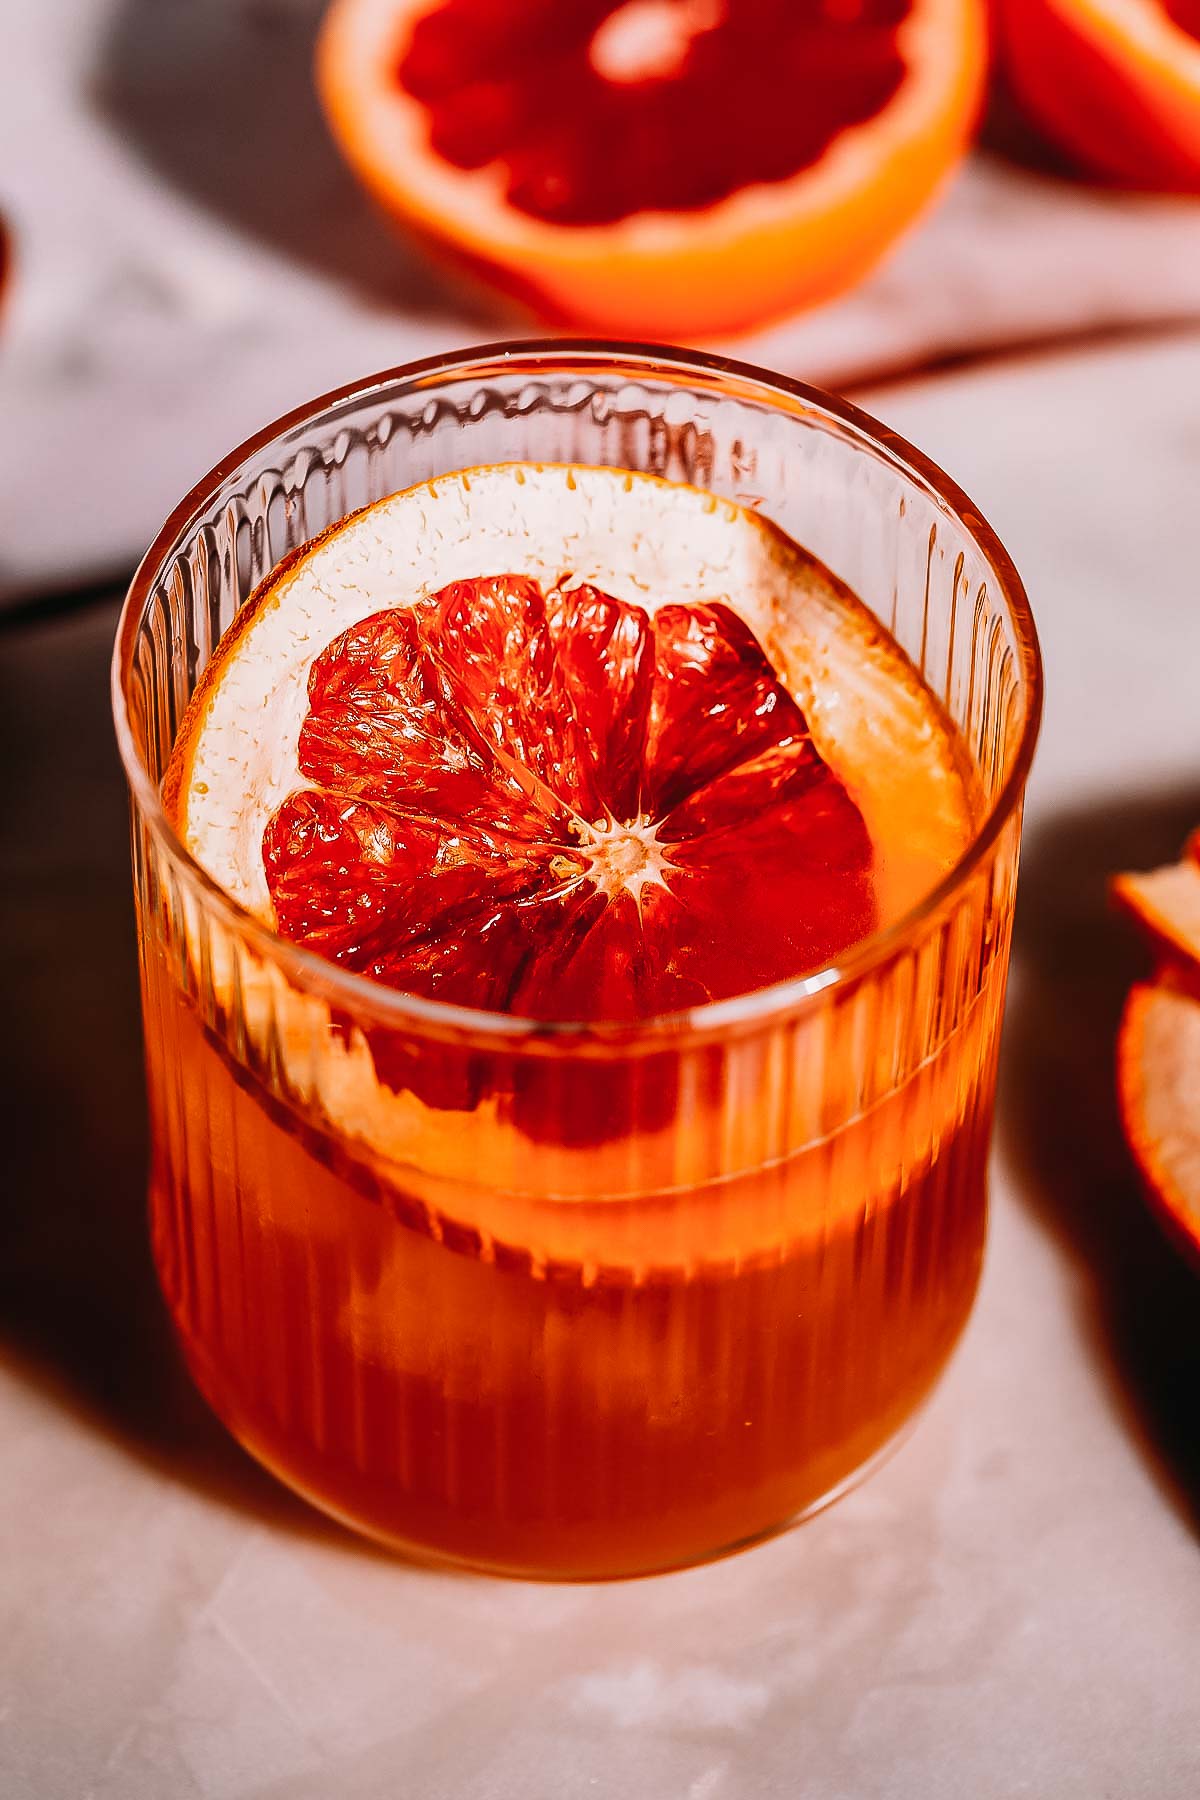 Overhead shot of a grapefruit garnish in a cocktail glass.